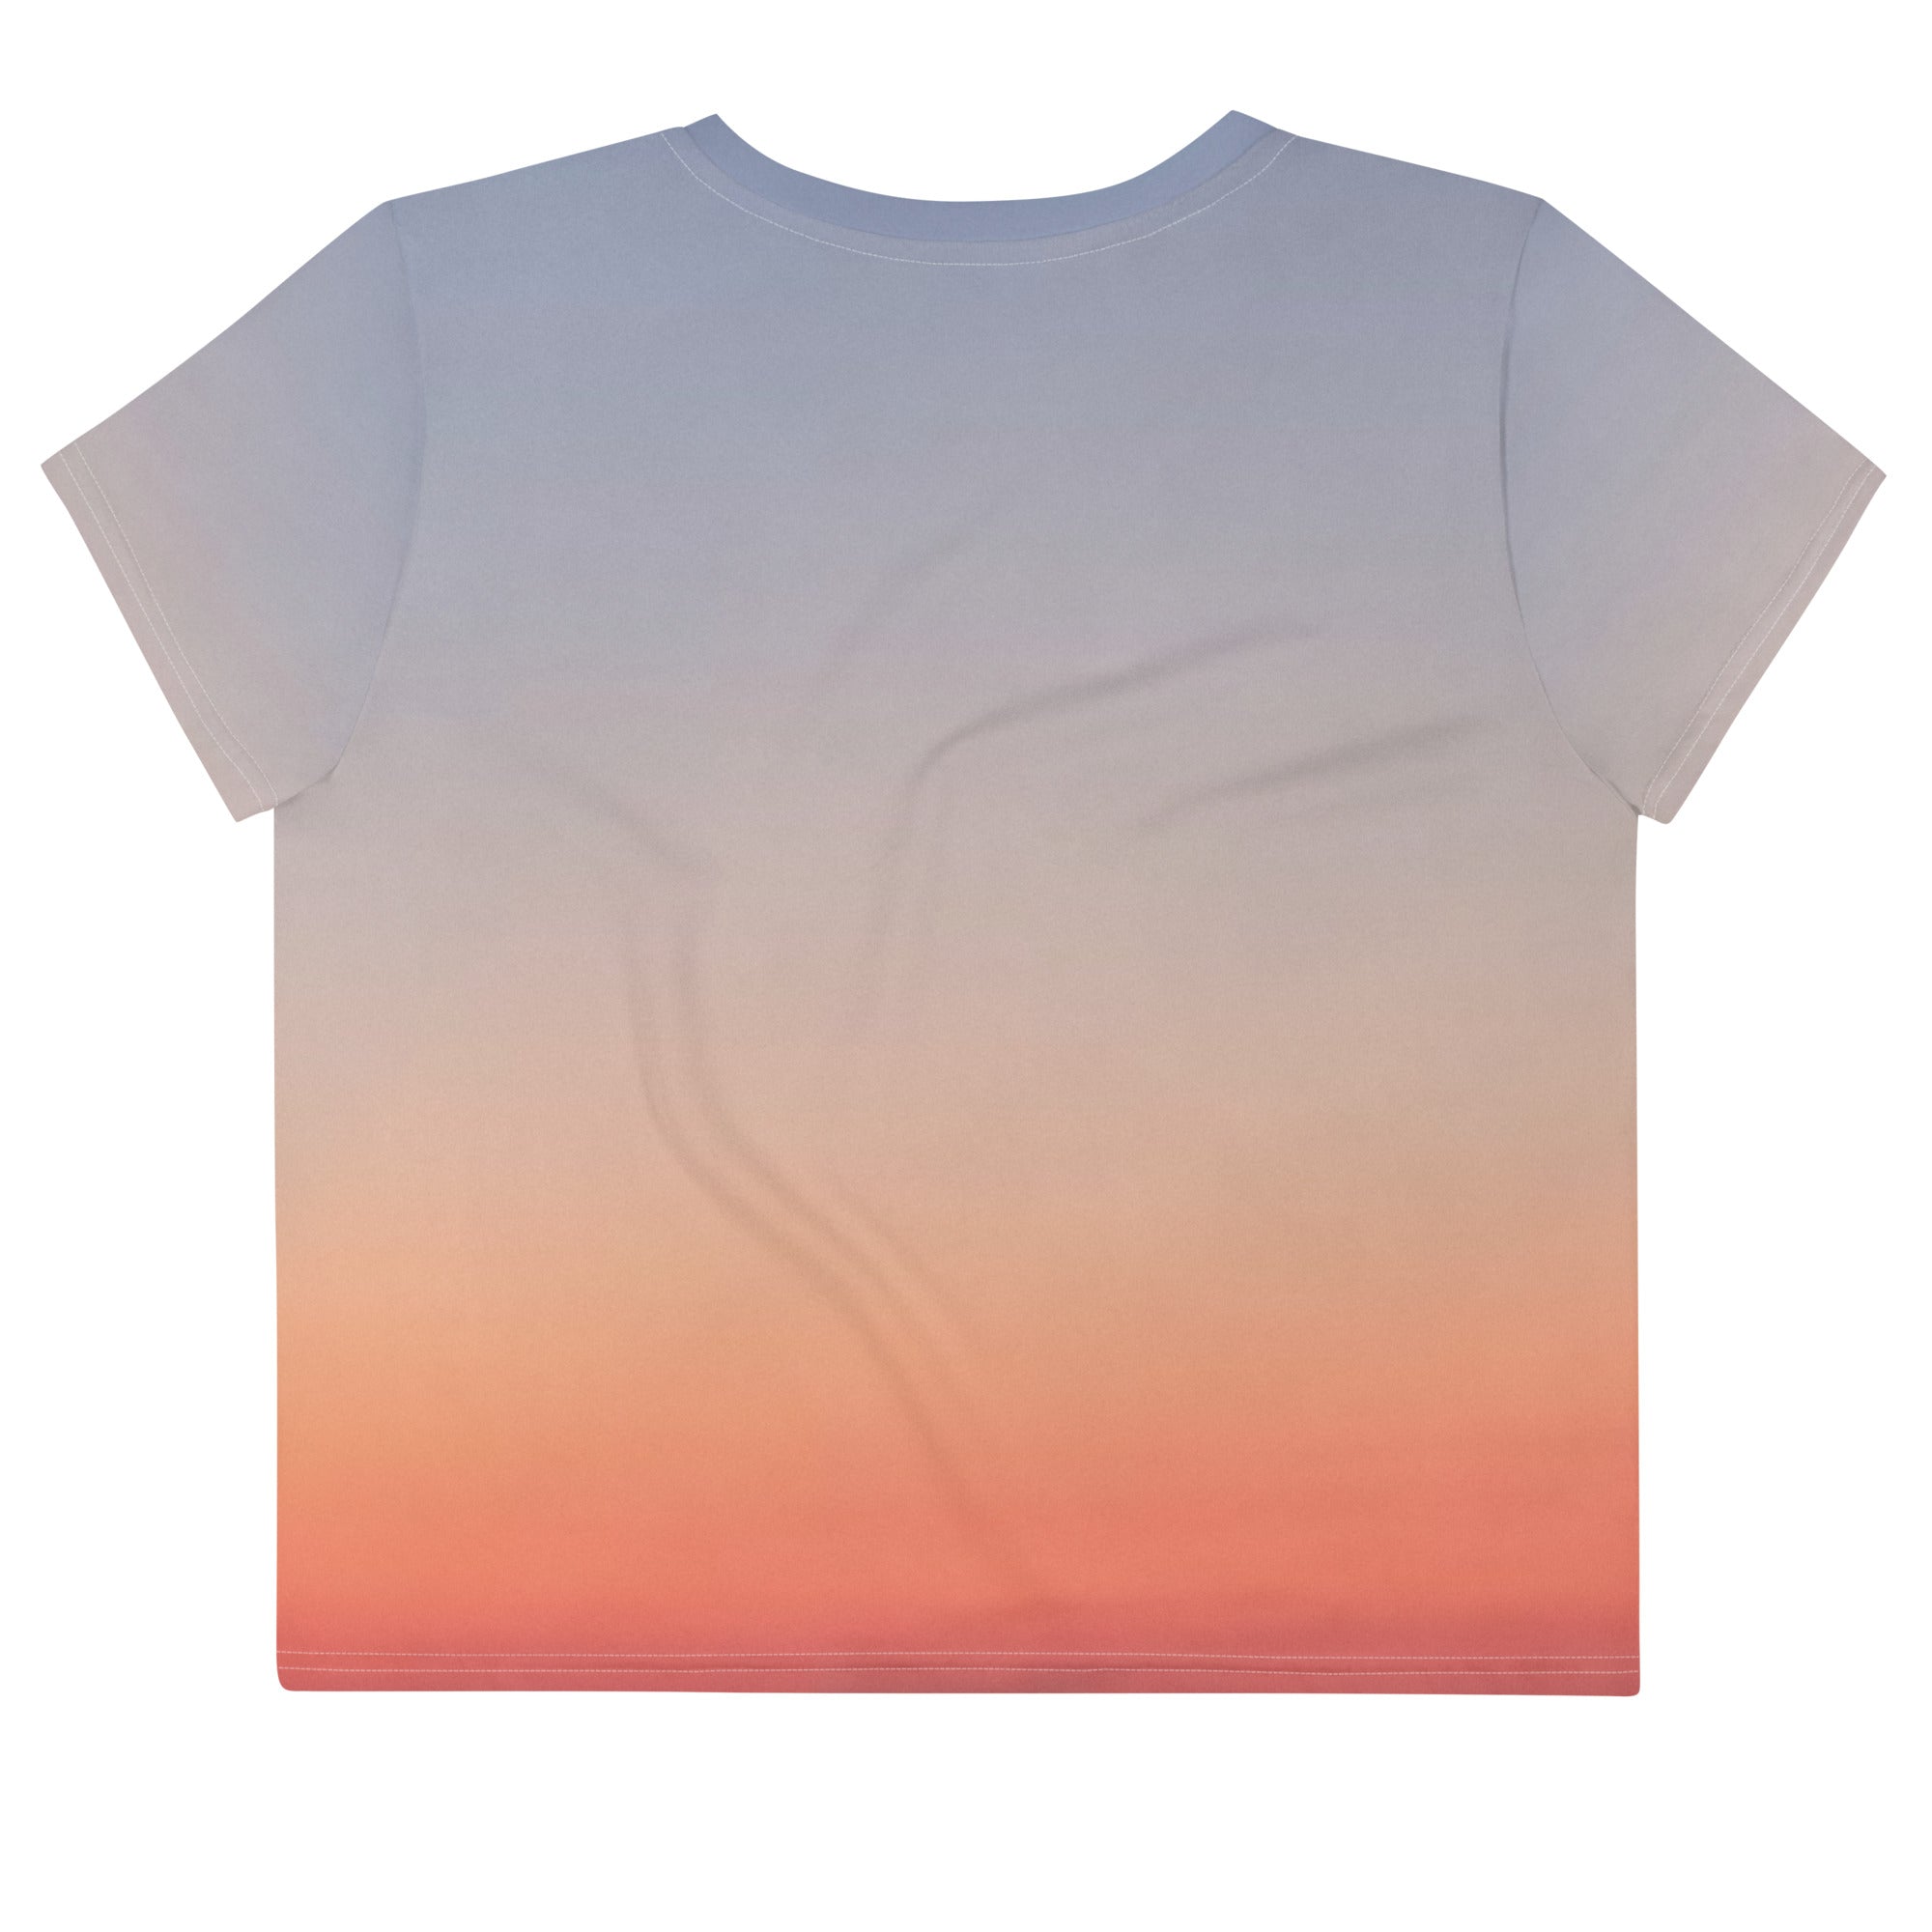 Camiseta corta "Sunset Vibes" by Flame